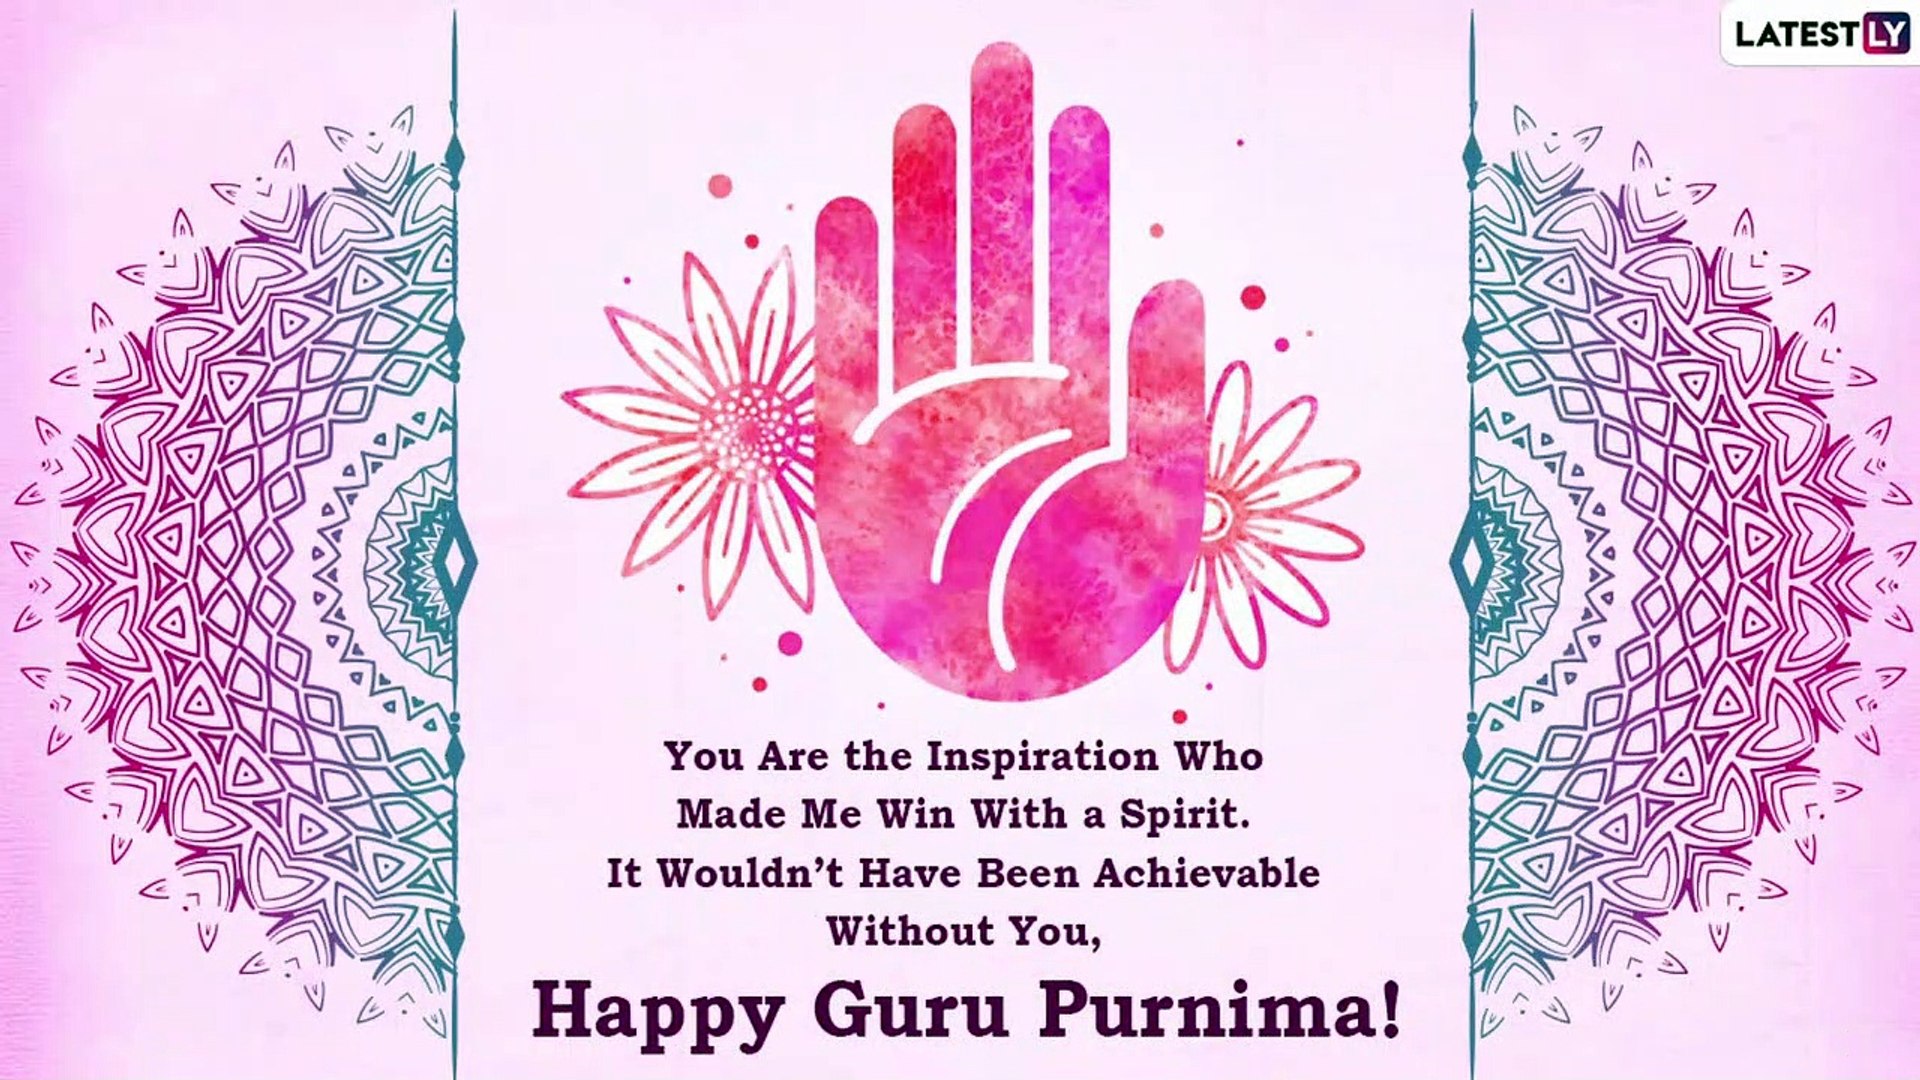 Happy Guru Purnima 2022 Messages and Images: Send Thoughtful Quotes &  Greetings to Loved Ones - video Dailymotion